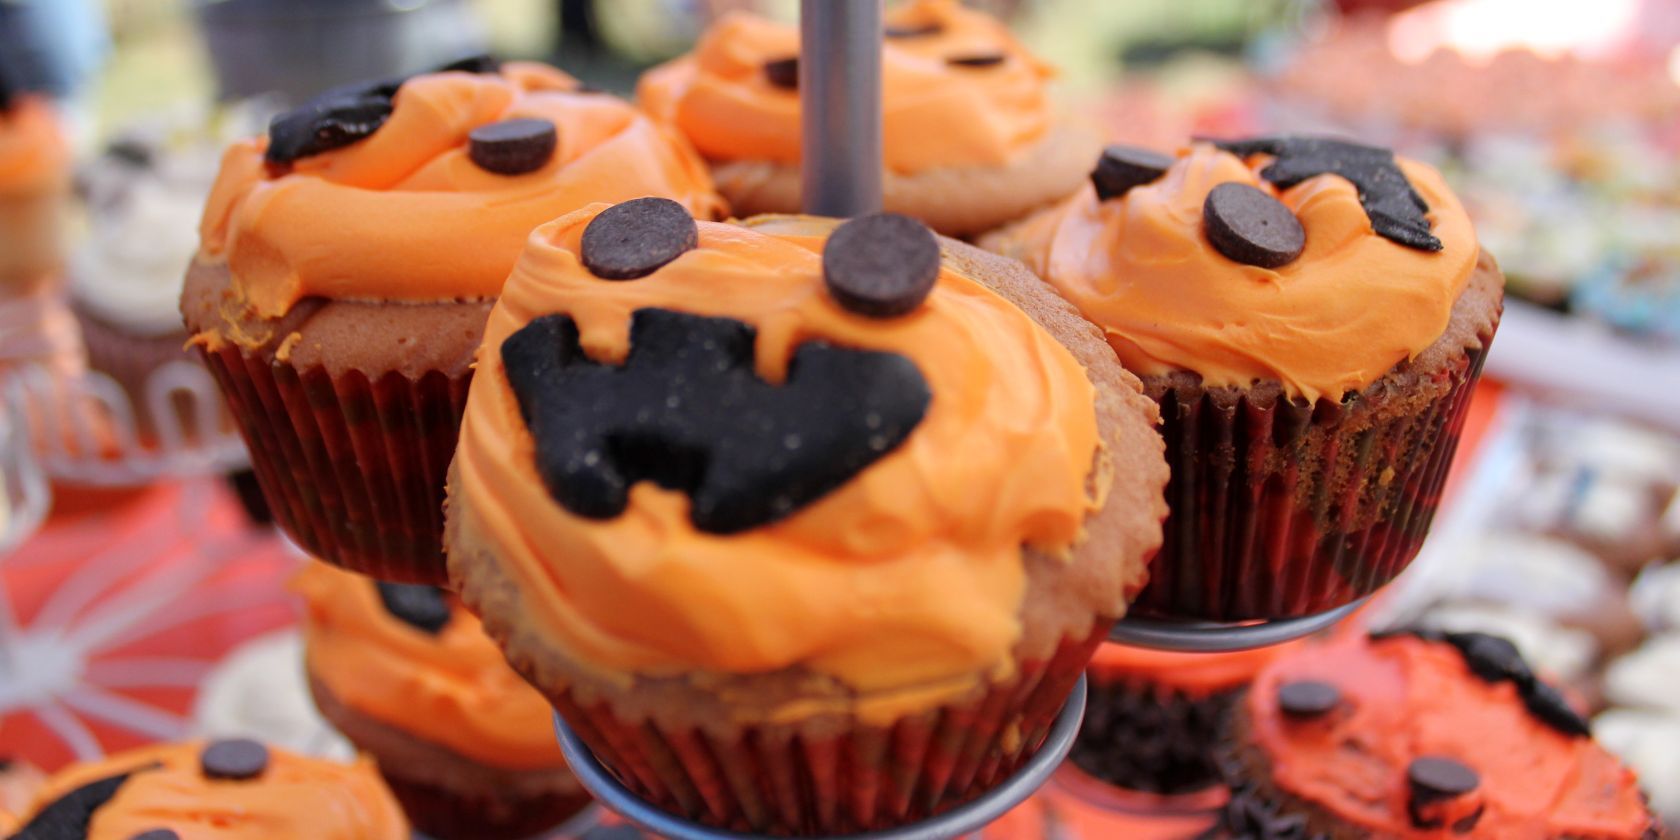 10 Awesome And Creepy Halloween Treats You Can Find On Instagram